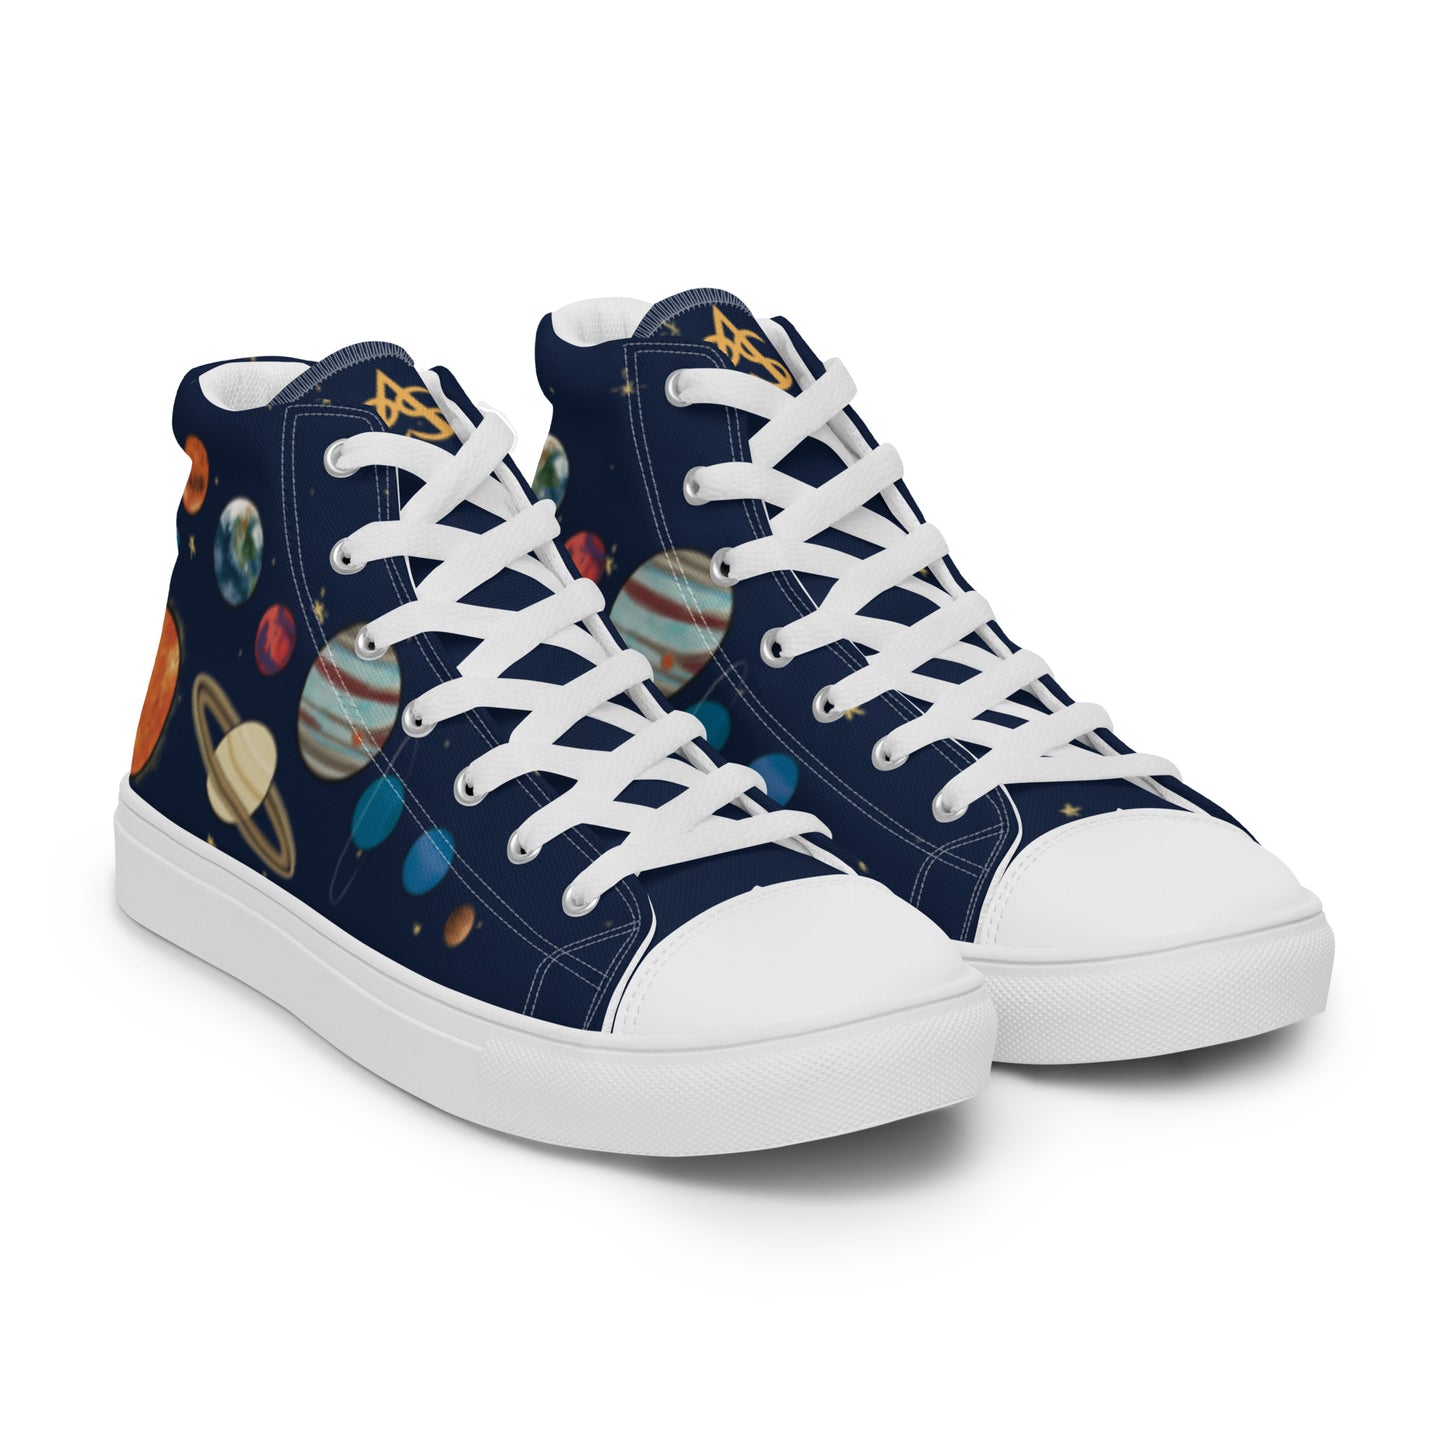 Right front view: A pair of high top shoes with painted solar system and starry background with white laces.